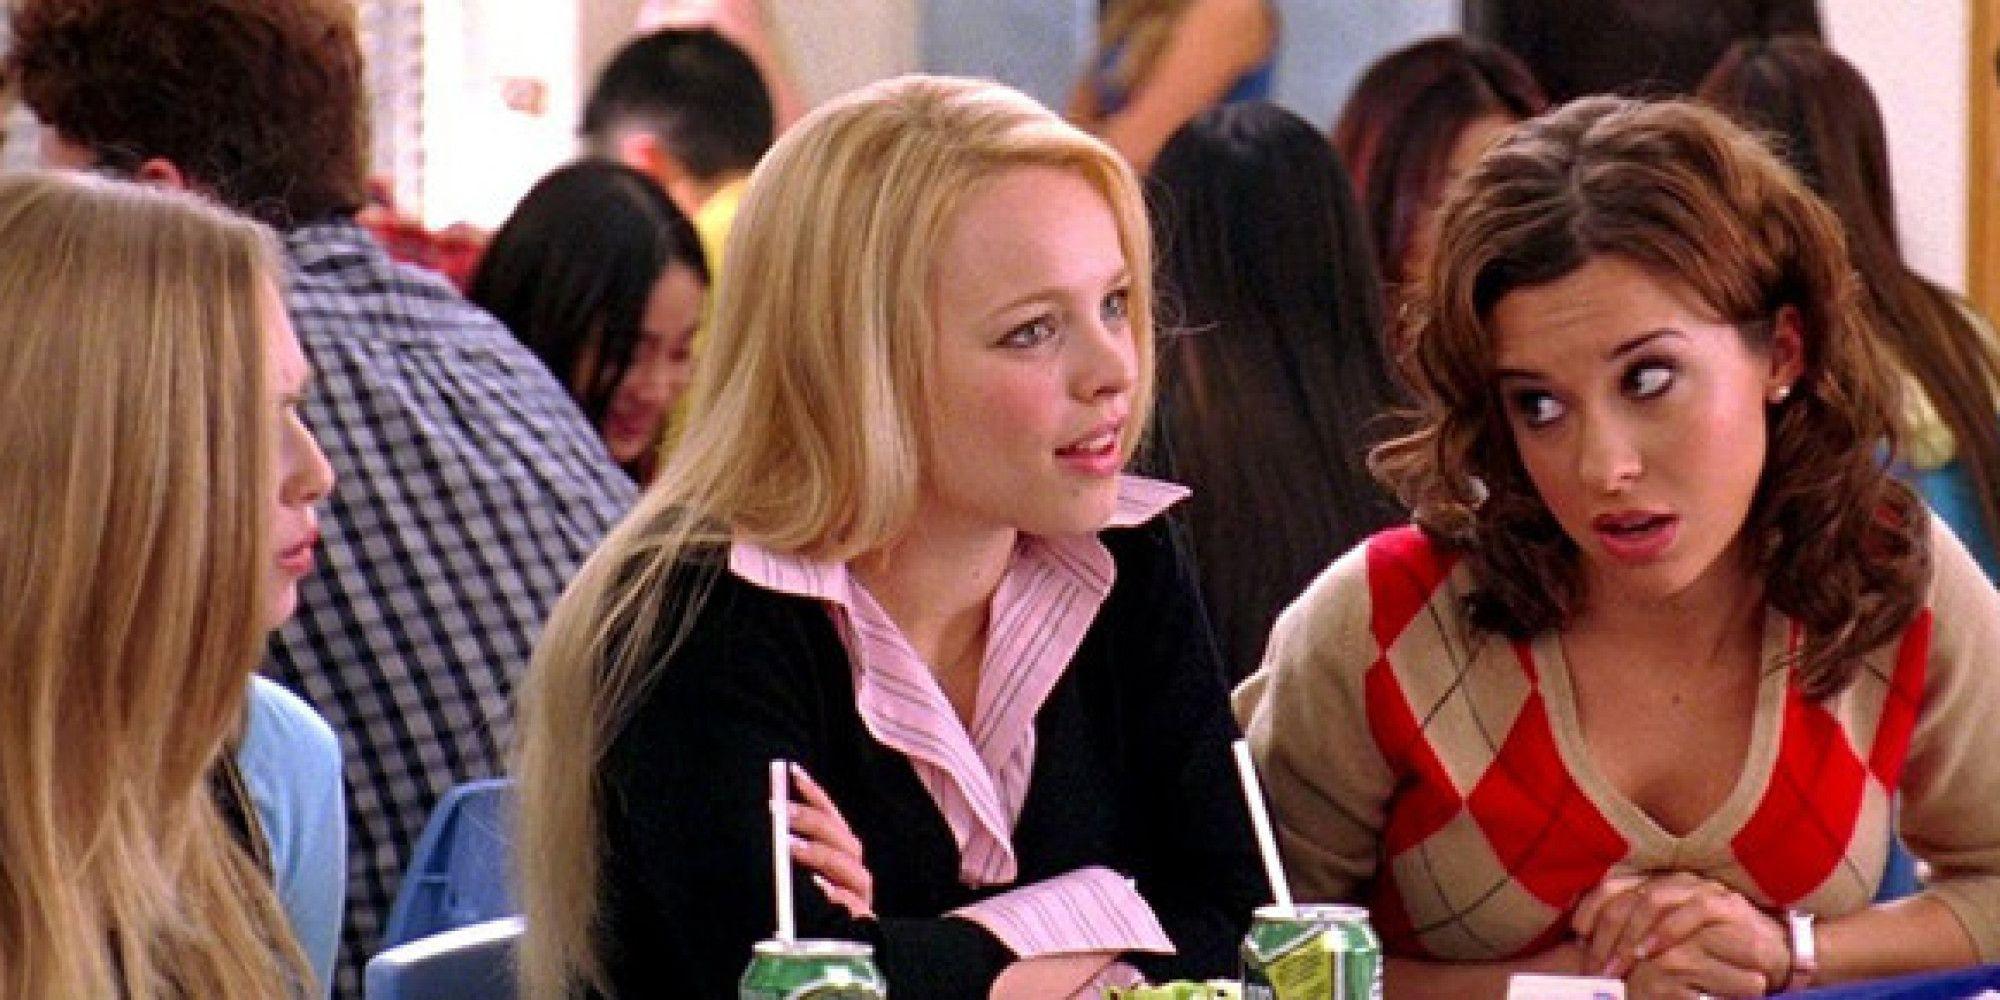 Mean Girls The Movie for Teens Years Later